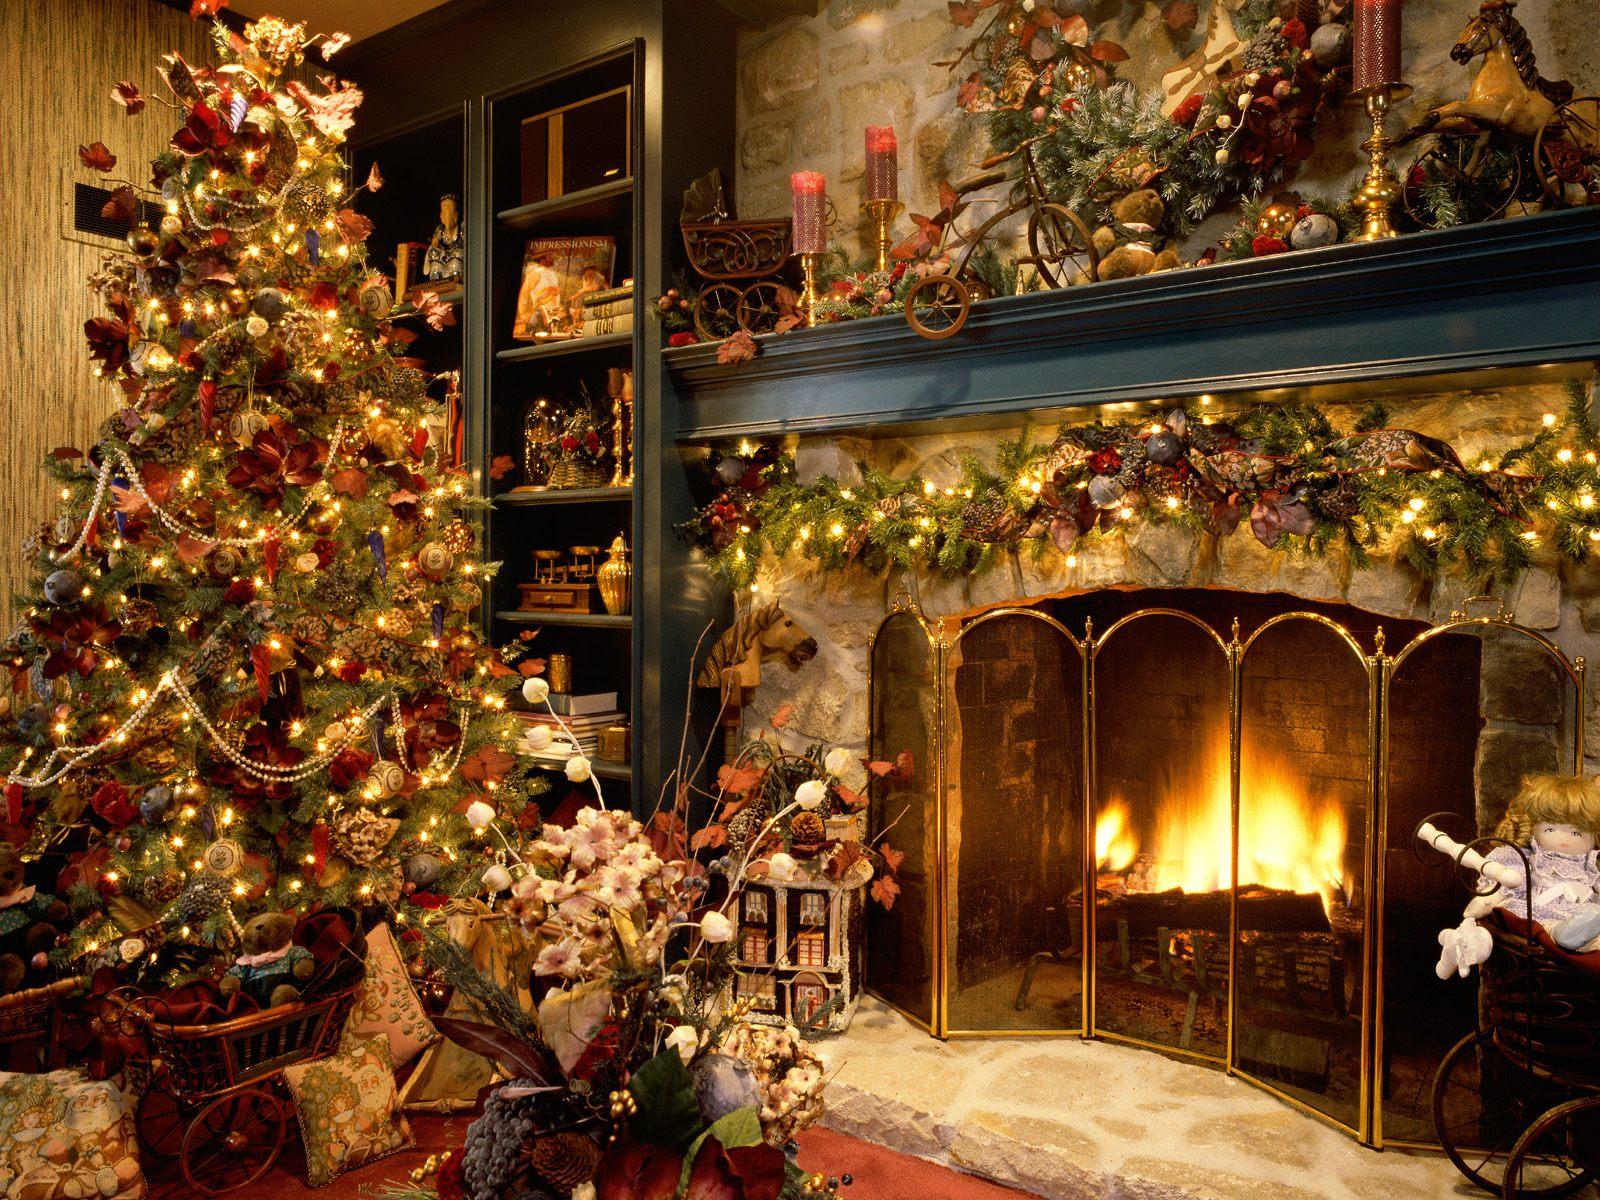 Home decorated for Christmas widescreen wallpaper. Wide